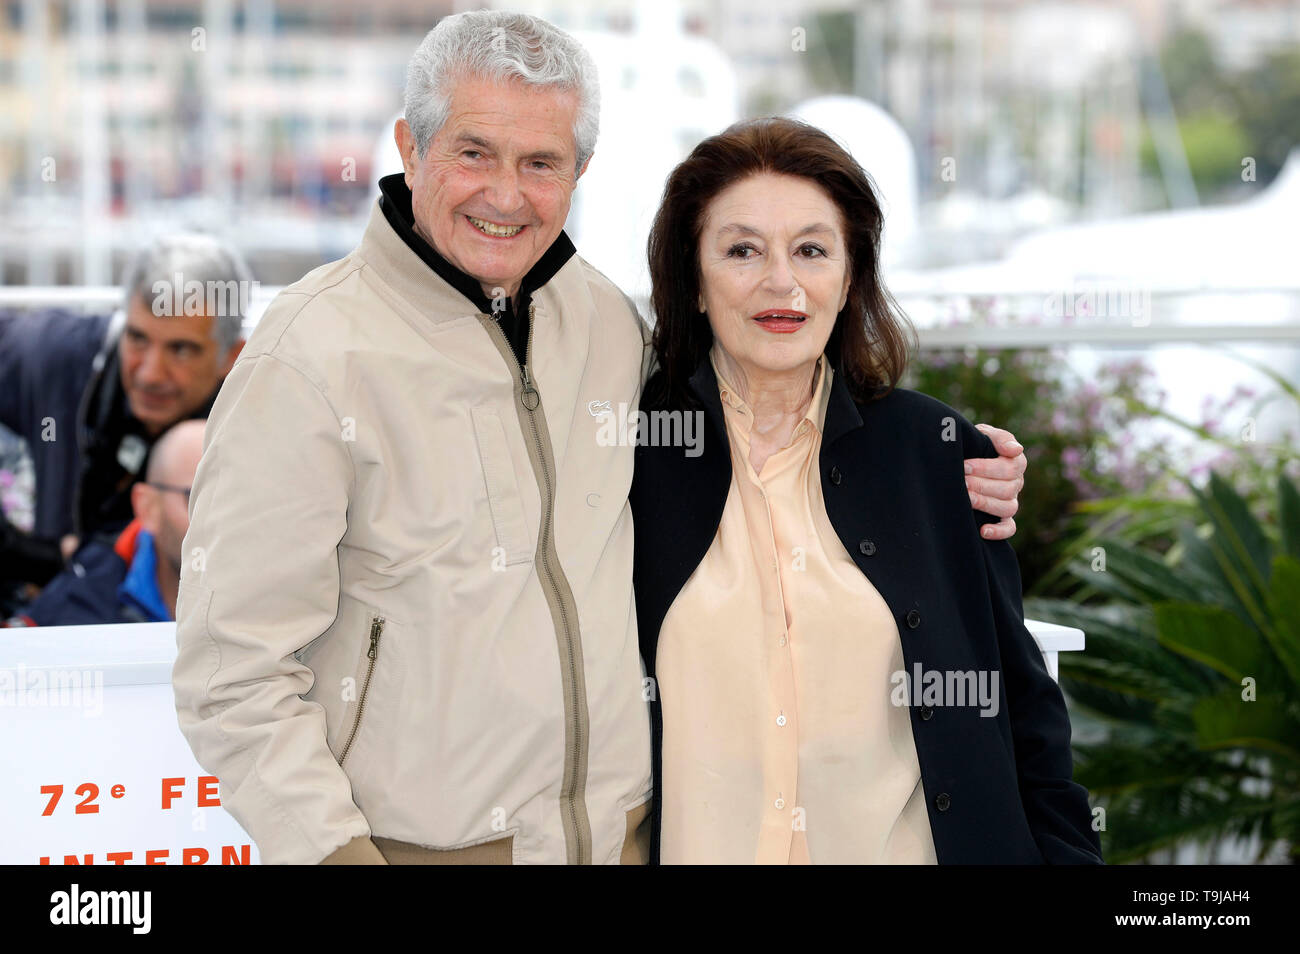 Anouk aimee actress hi-res stock photography and images - Alamy